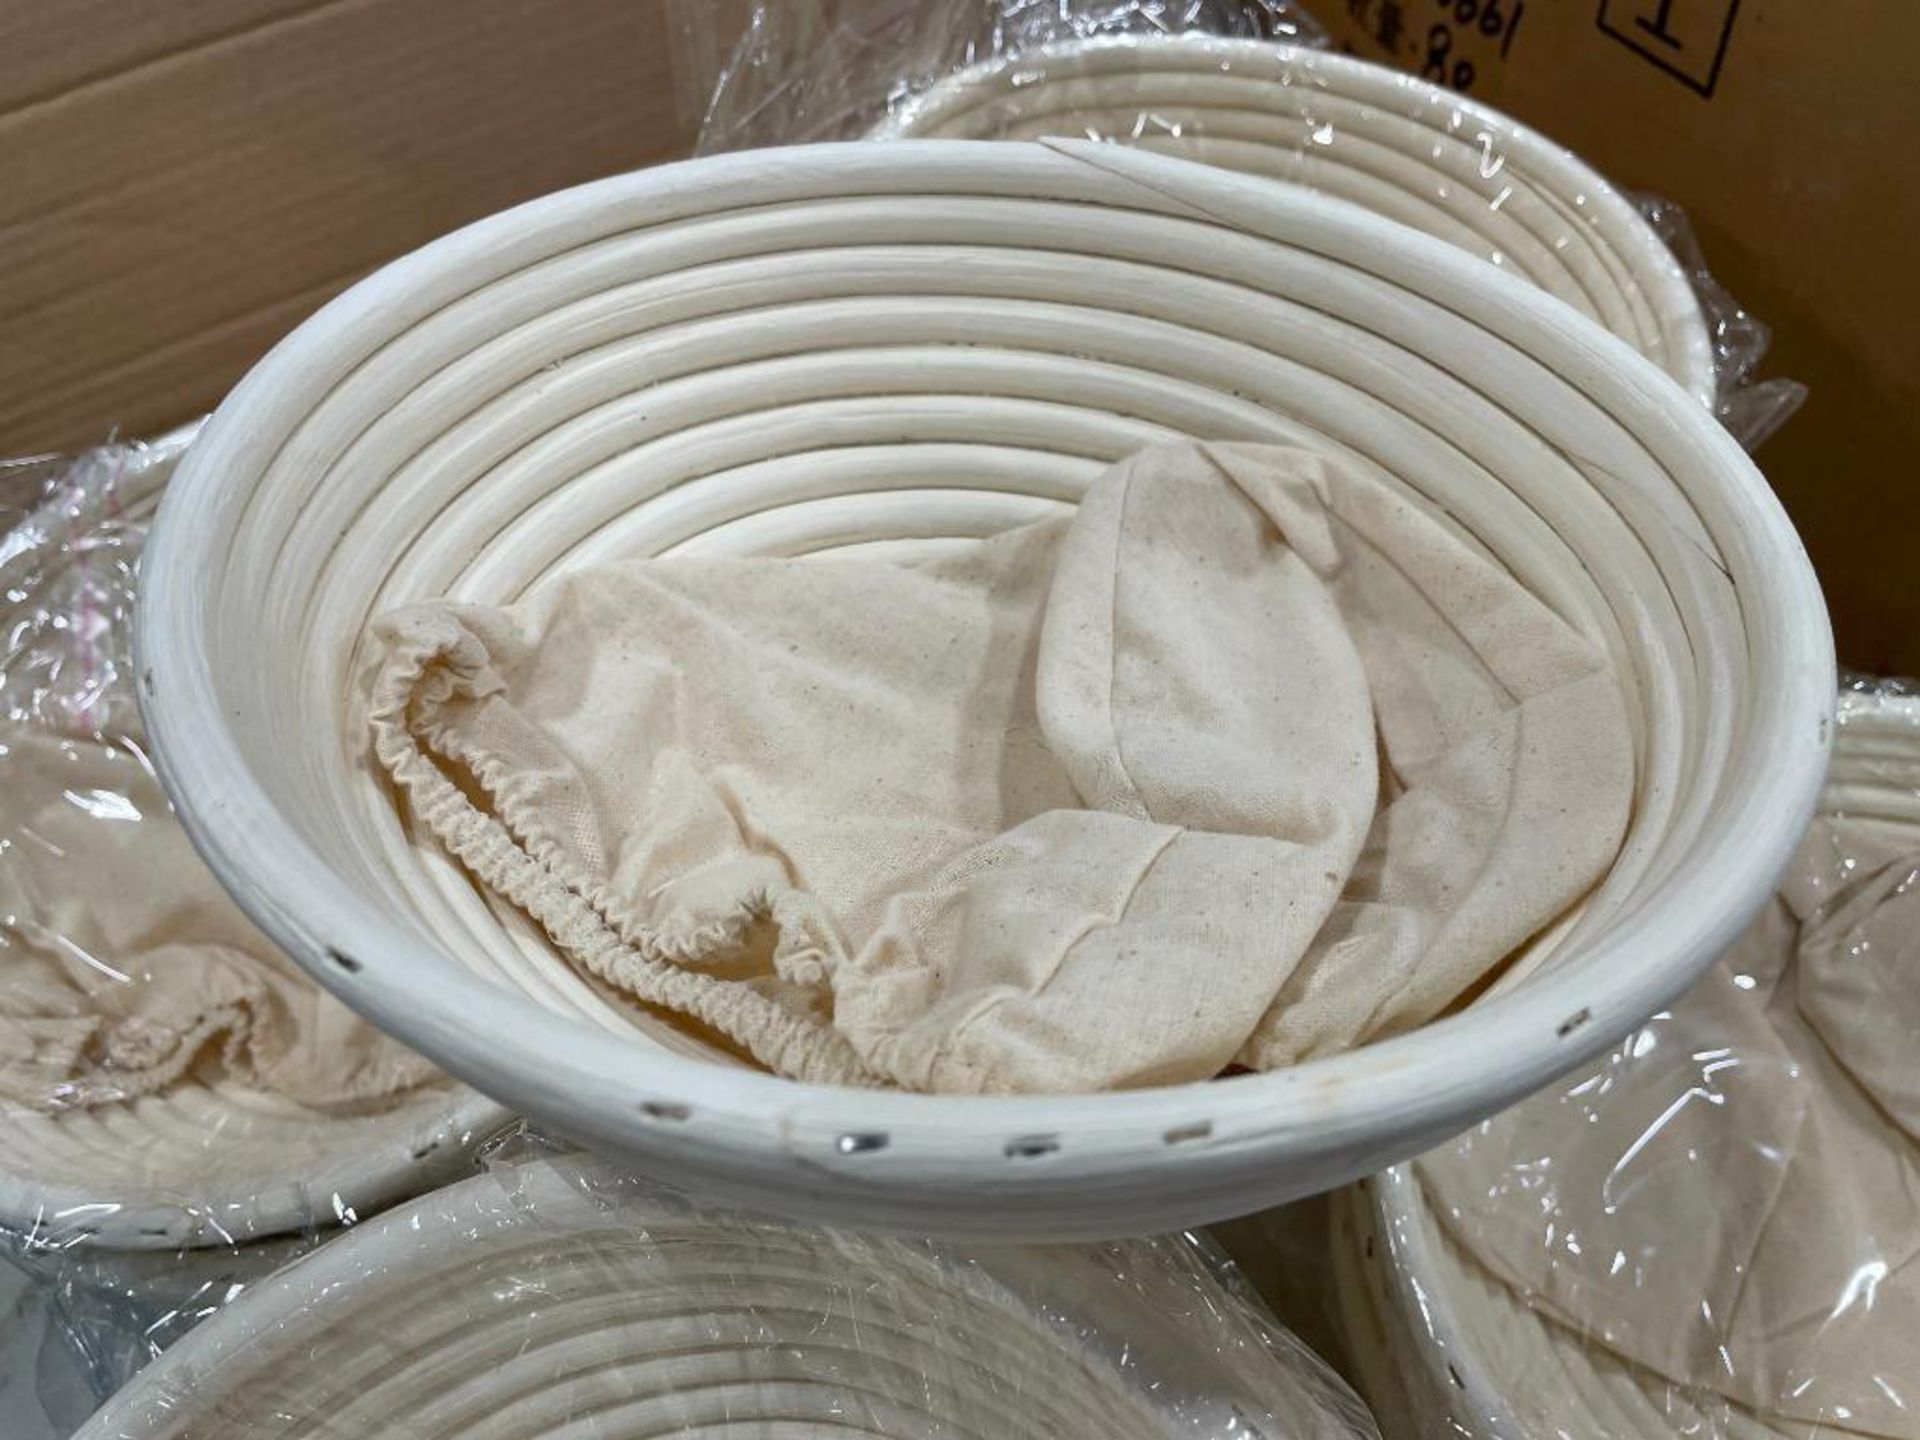 LOT OF APPROX. (20) 9" BREAD PROOFING BASKETS - Image 5 of 5